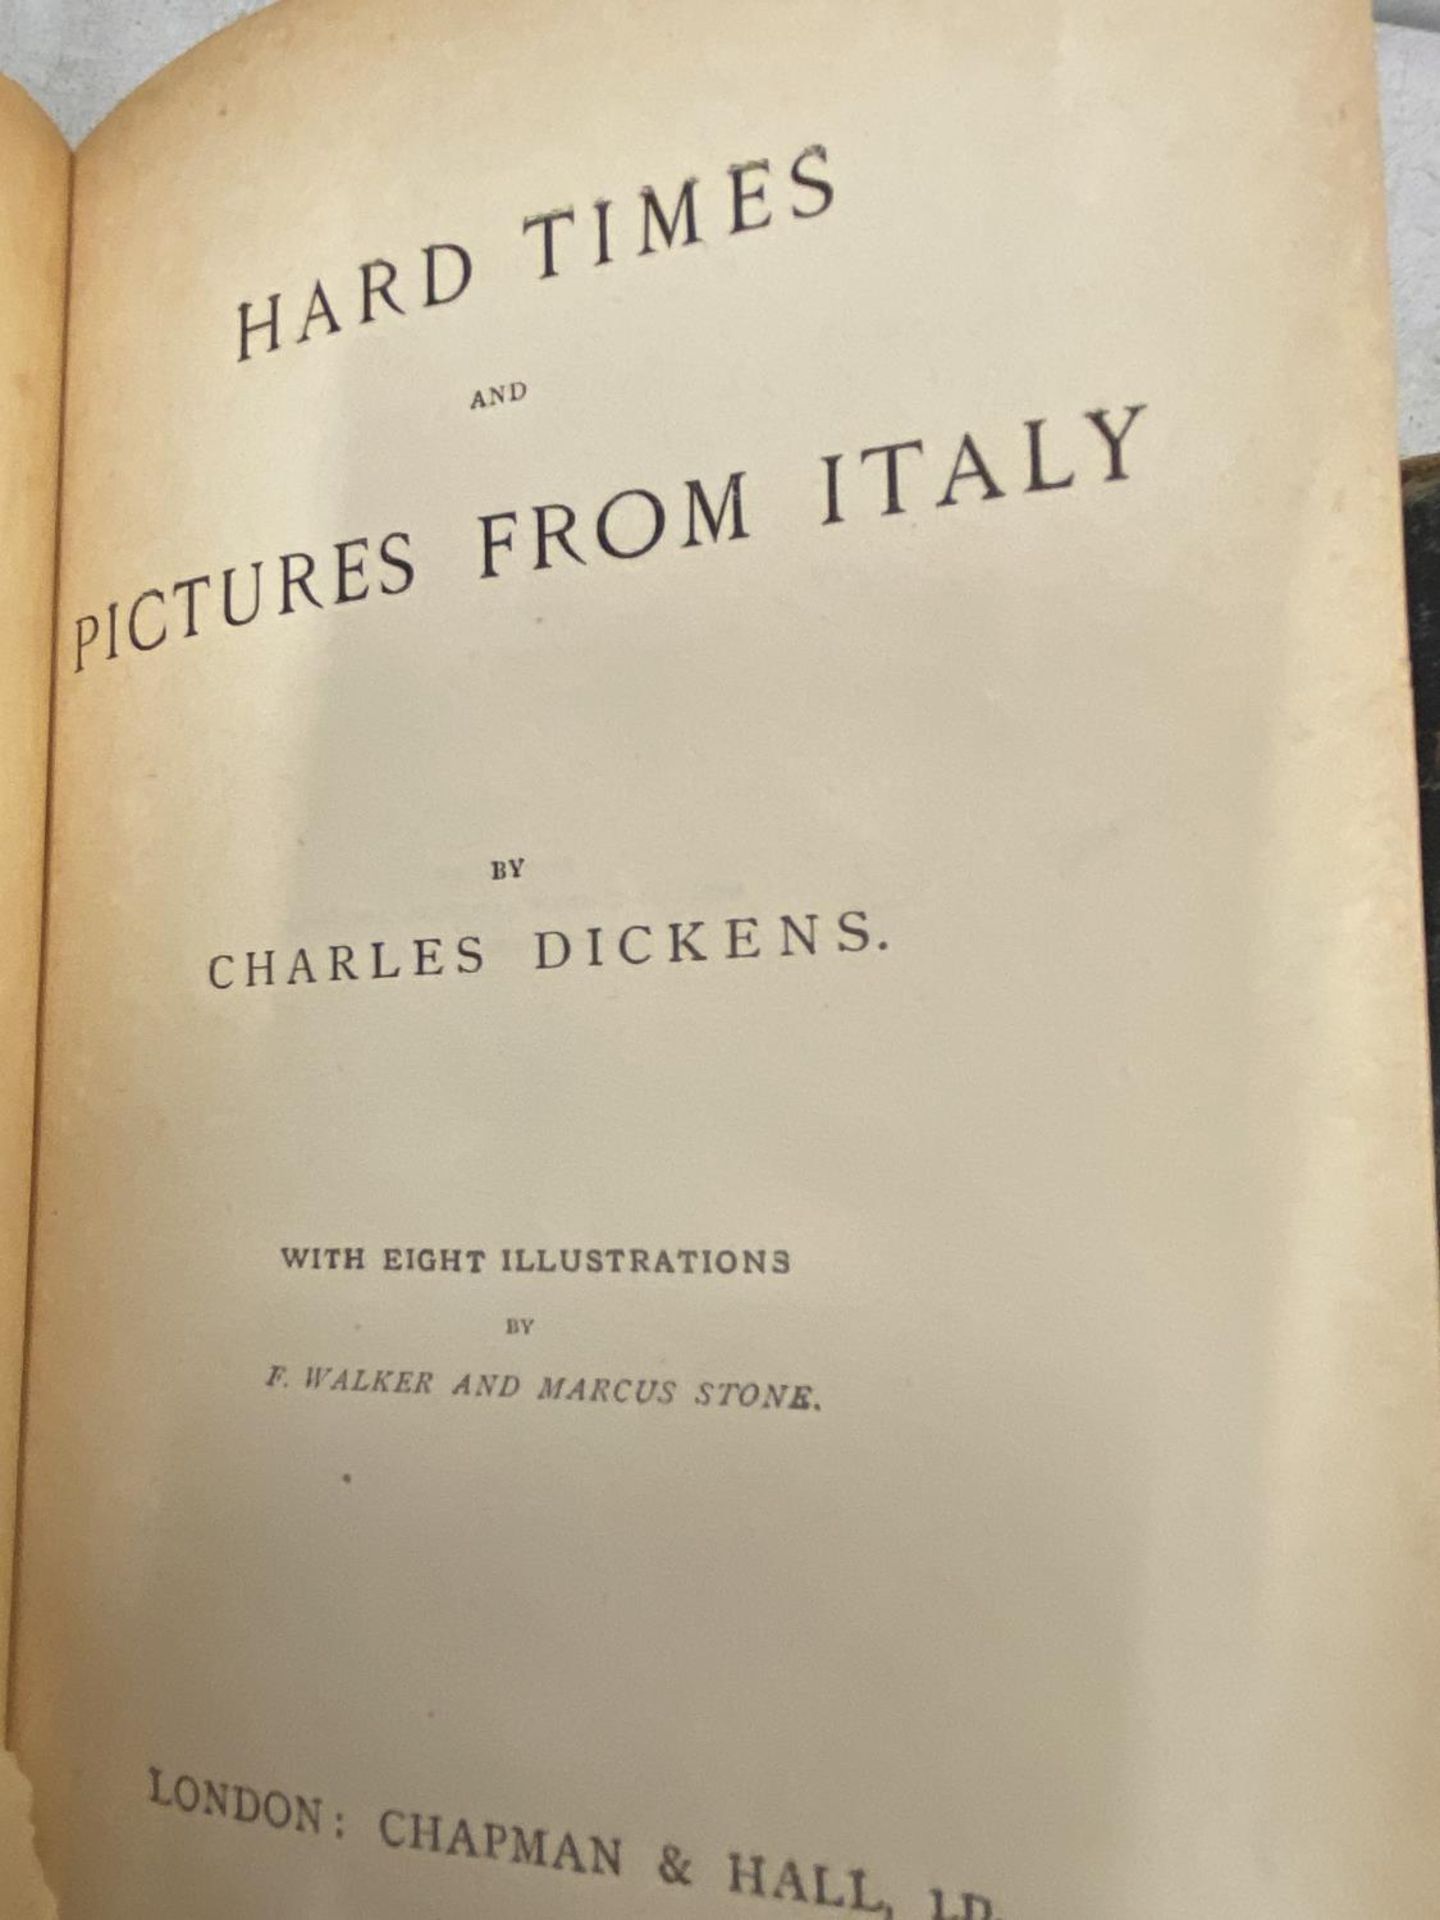 TWO ANTIQUARIAN CHARLES DICKEN NOVELS - 'DAVID COPPERFIELD' AND HARD TIMES AND PICTURES FROM ITALY' - Image 5 of 5